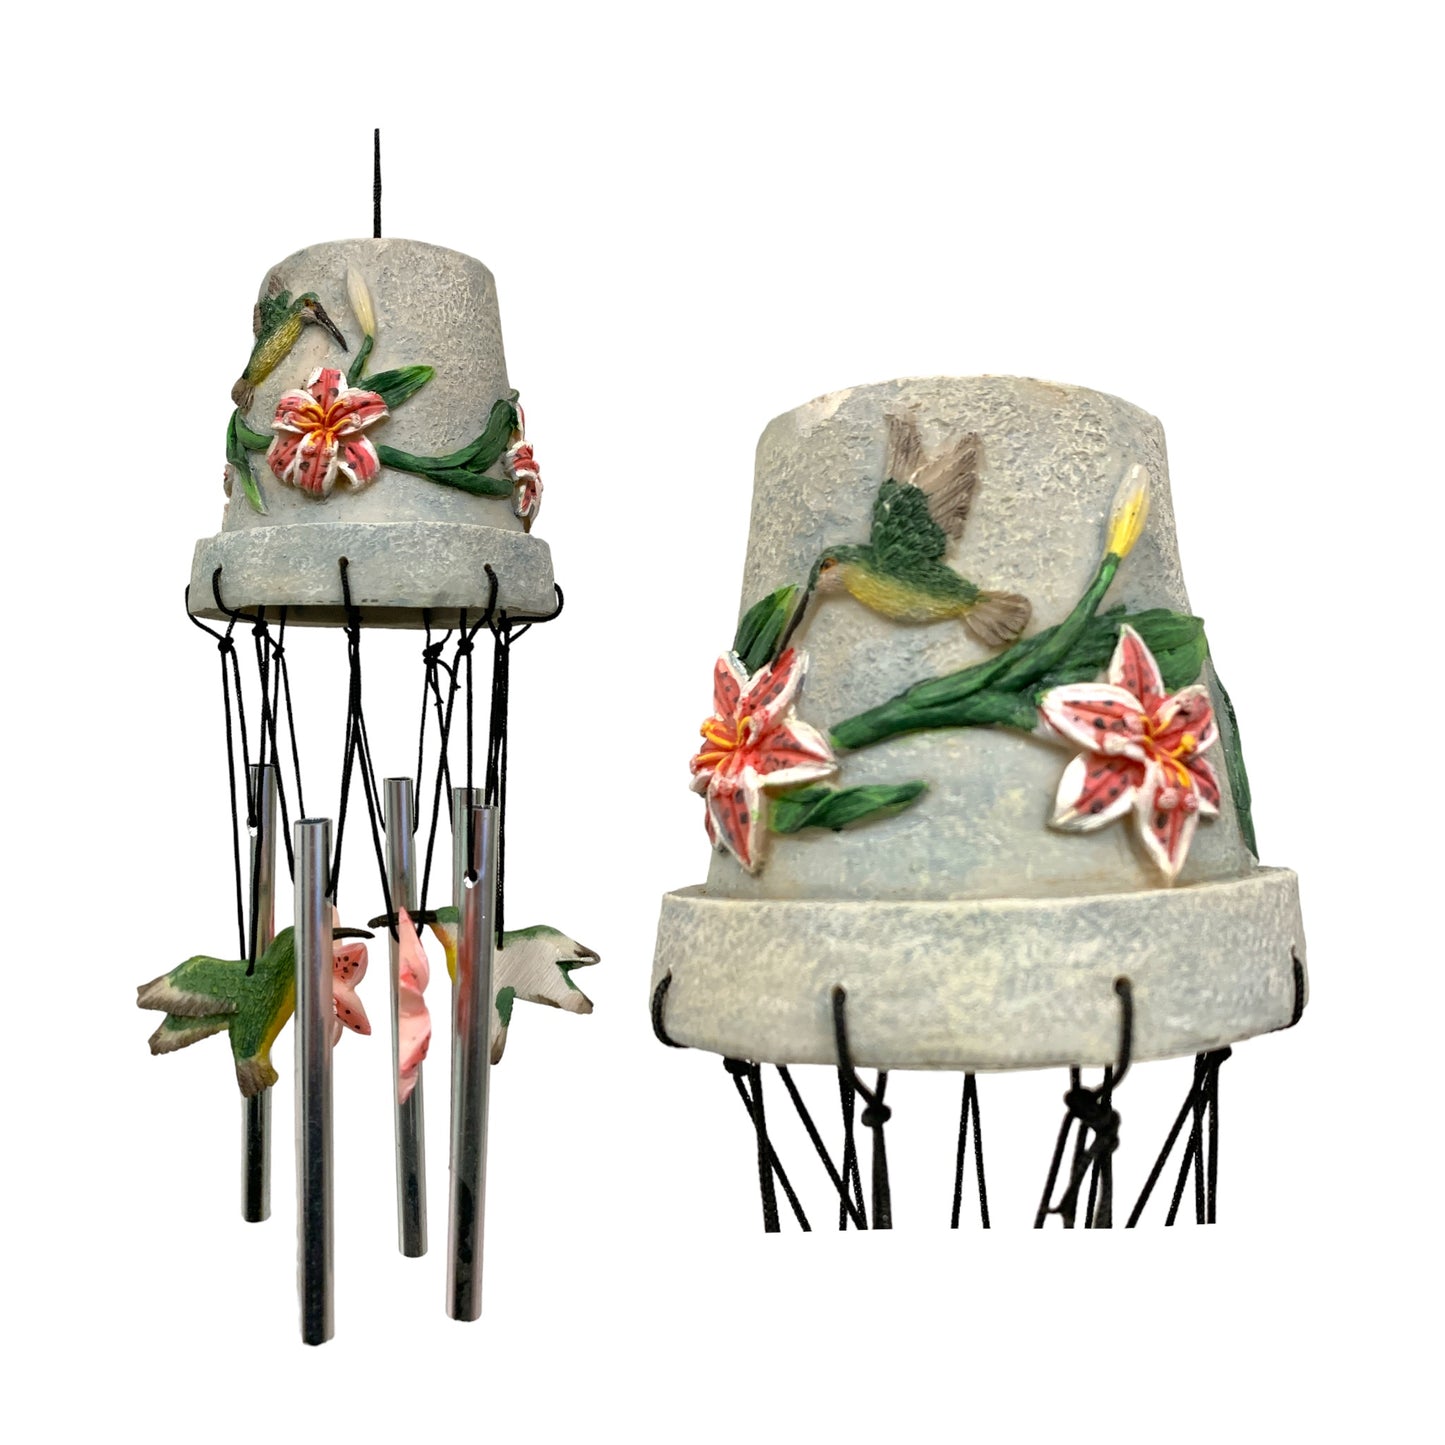 FLOWER POT WIND CHIME - 12 INCH - HUMMINGBIRDS AND LILLIES